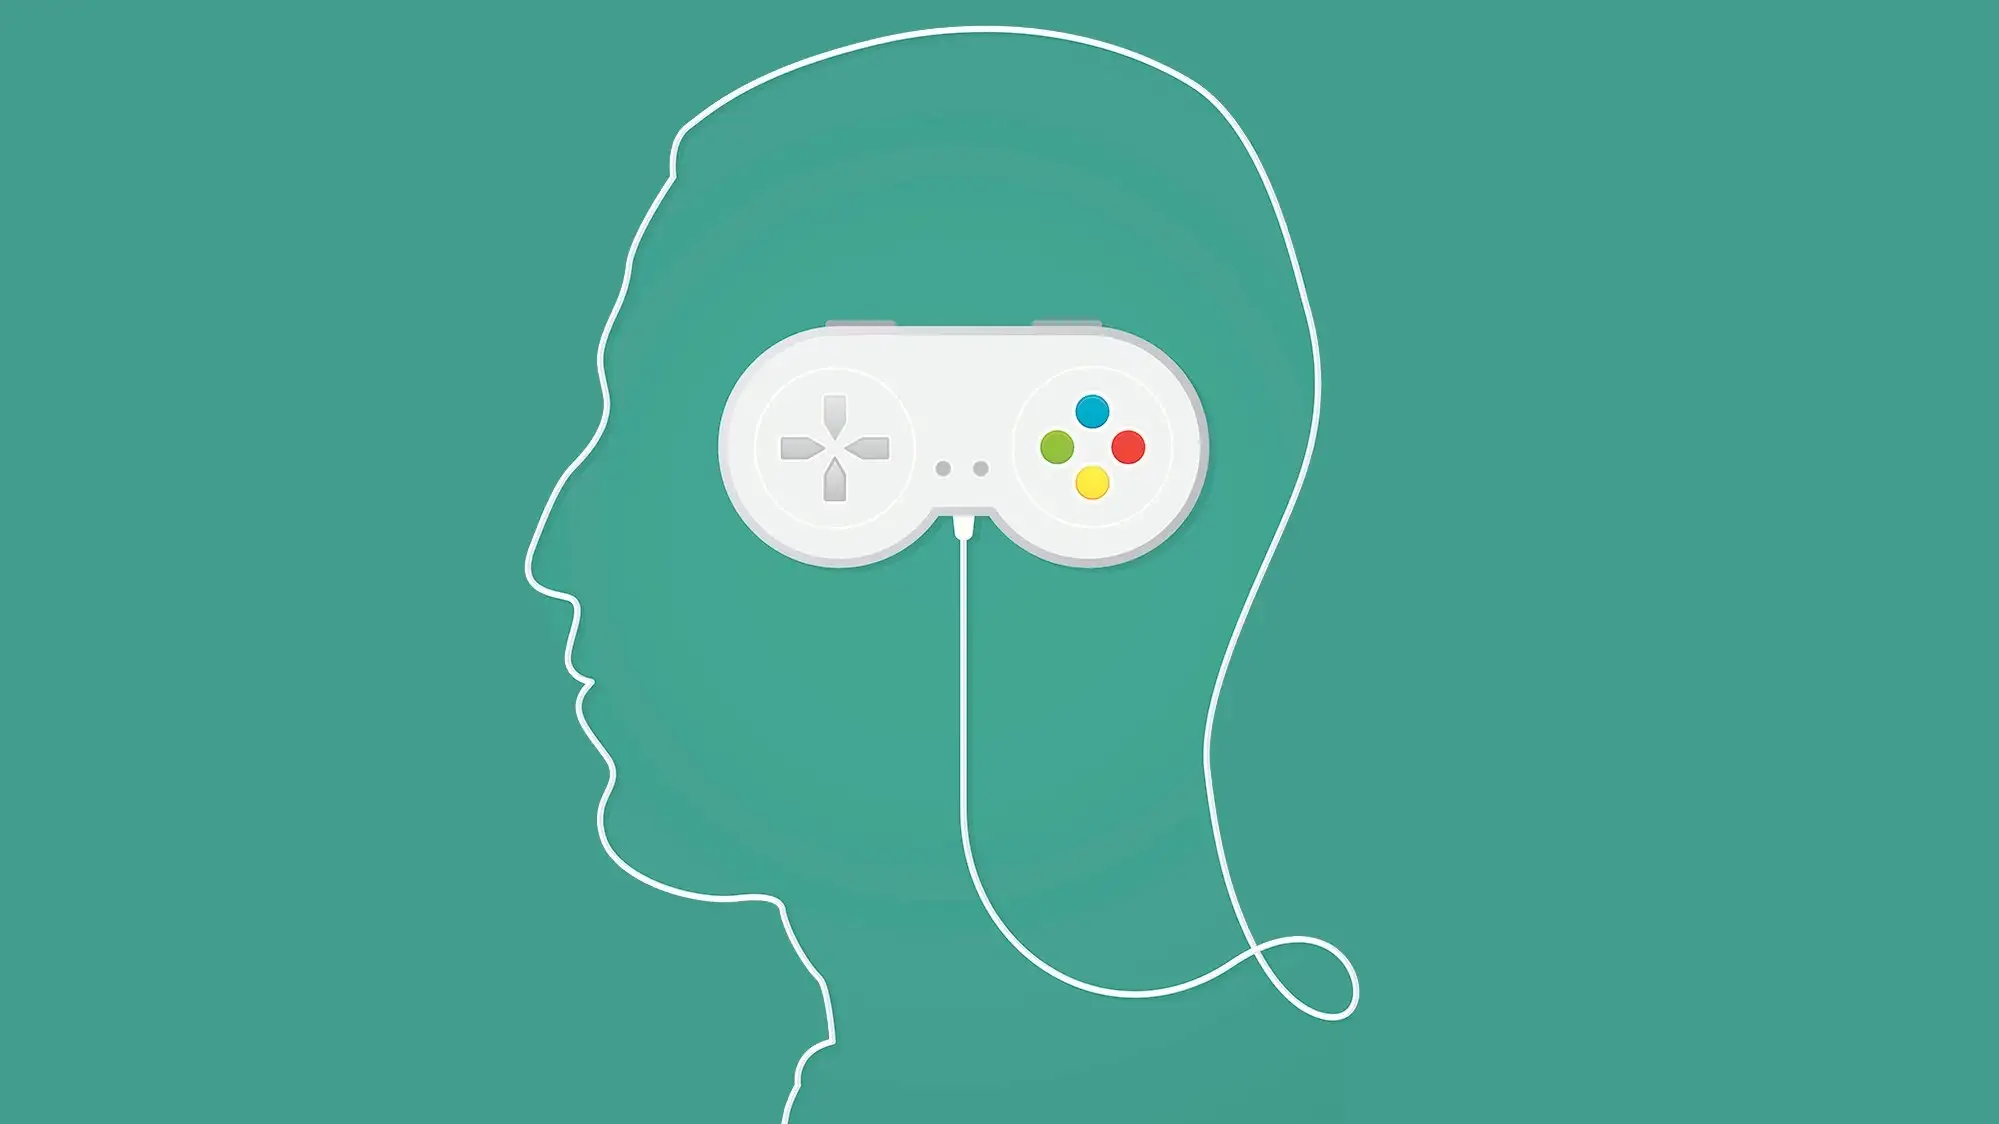 Five Games That Could Improve Your Health